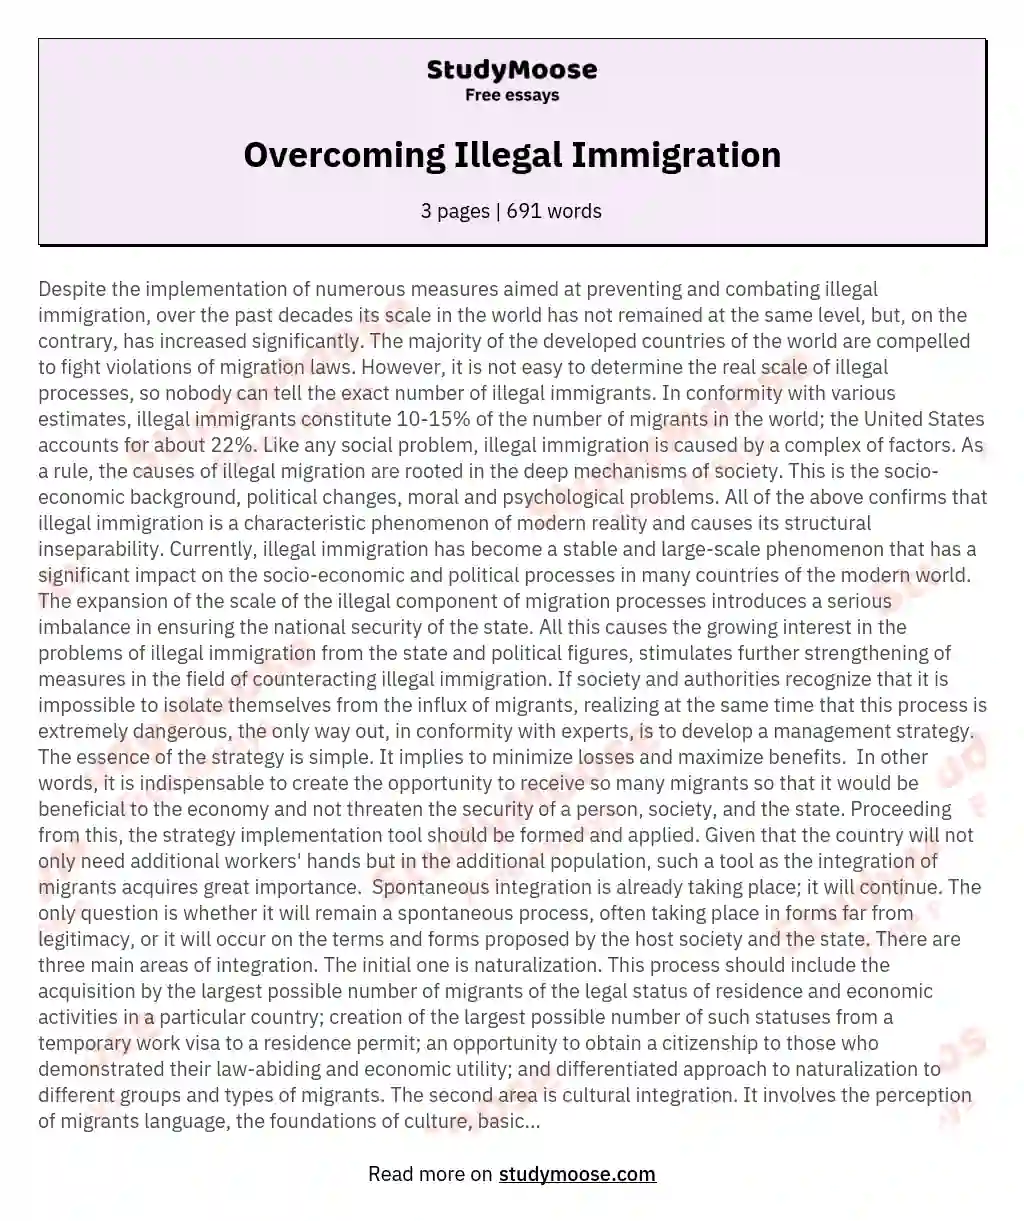 Overcoming Illegal Immigration essay